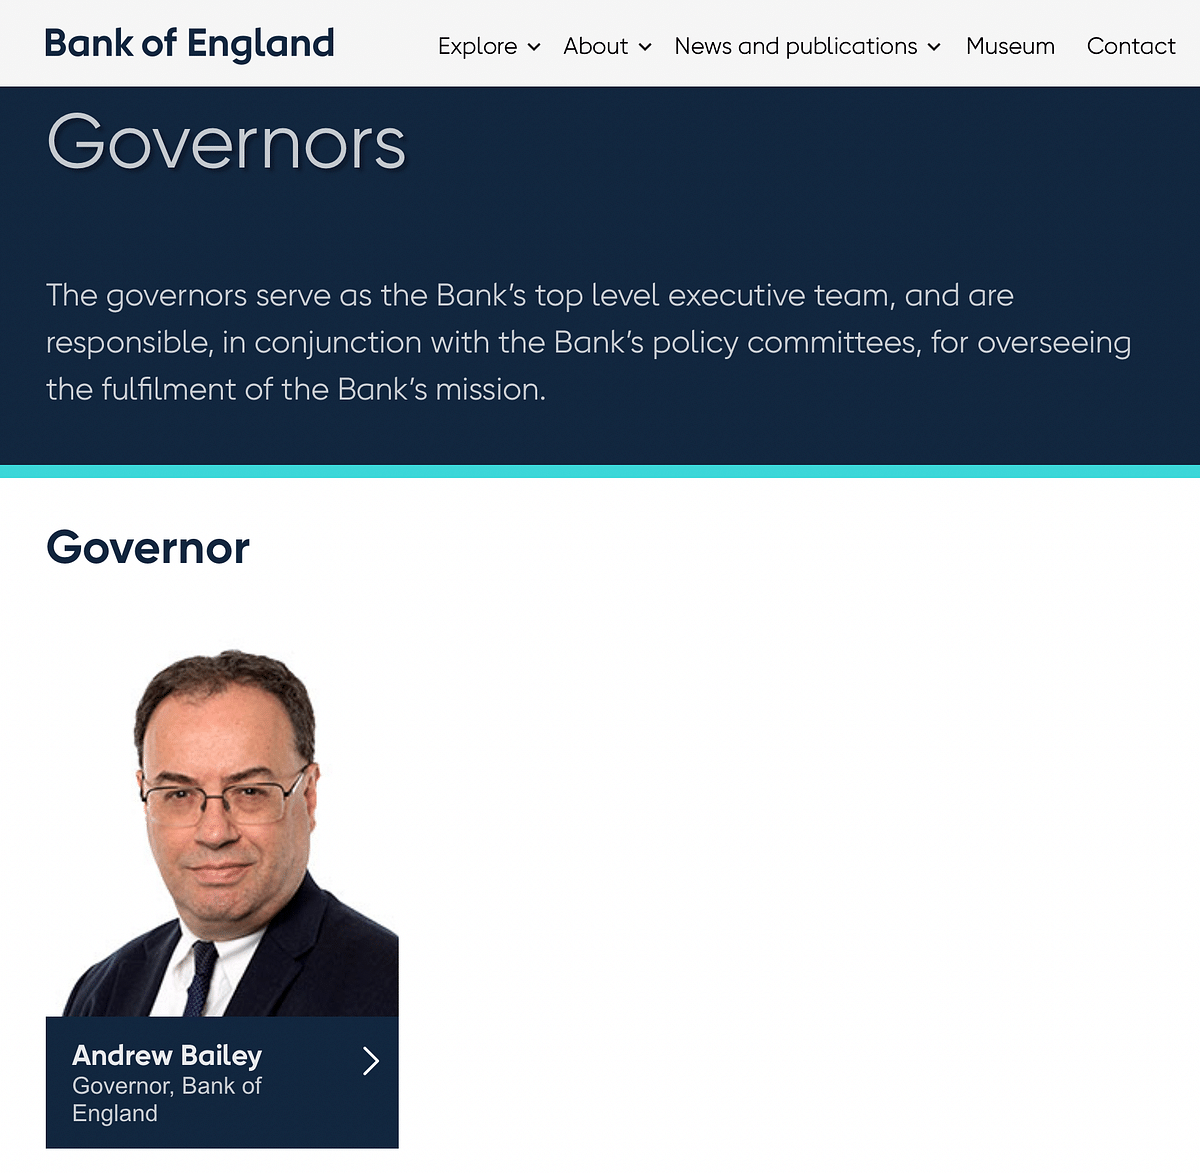 The Bank of England’s Governor is Andrew Bailey, who will stay in office until 2028.